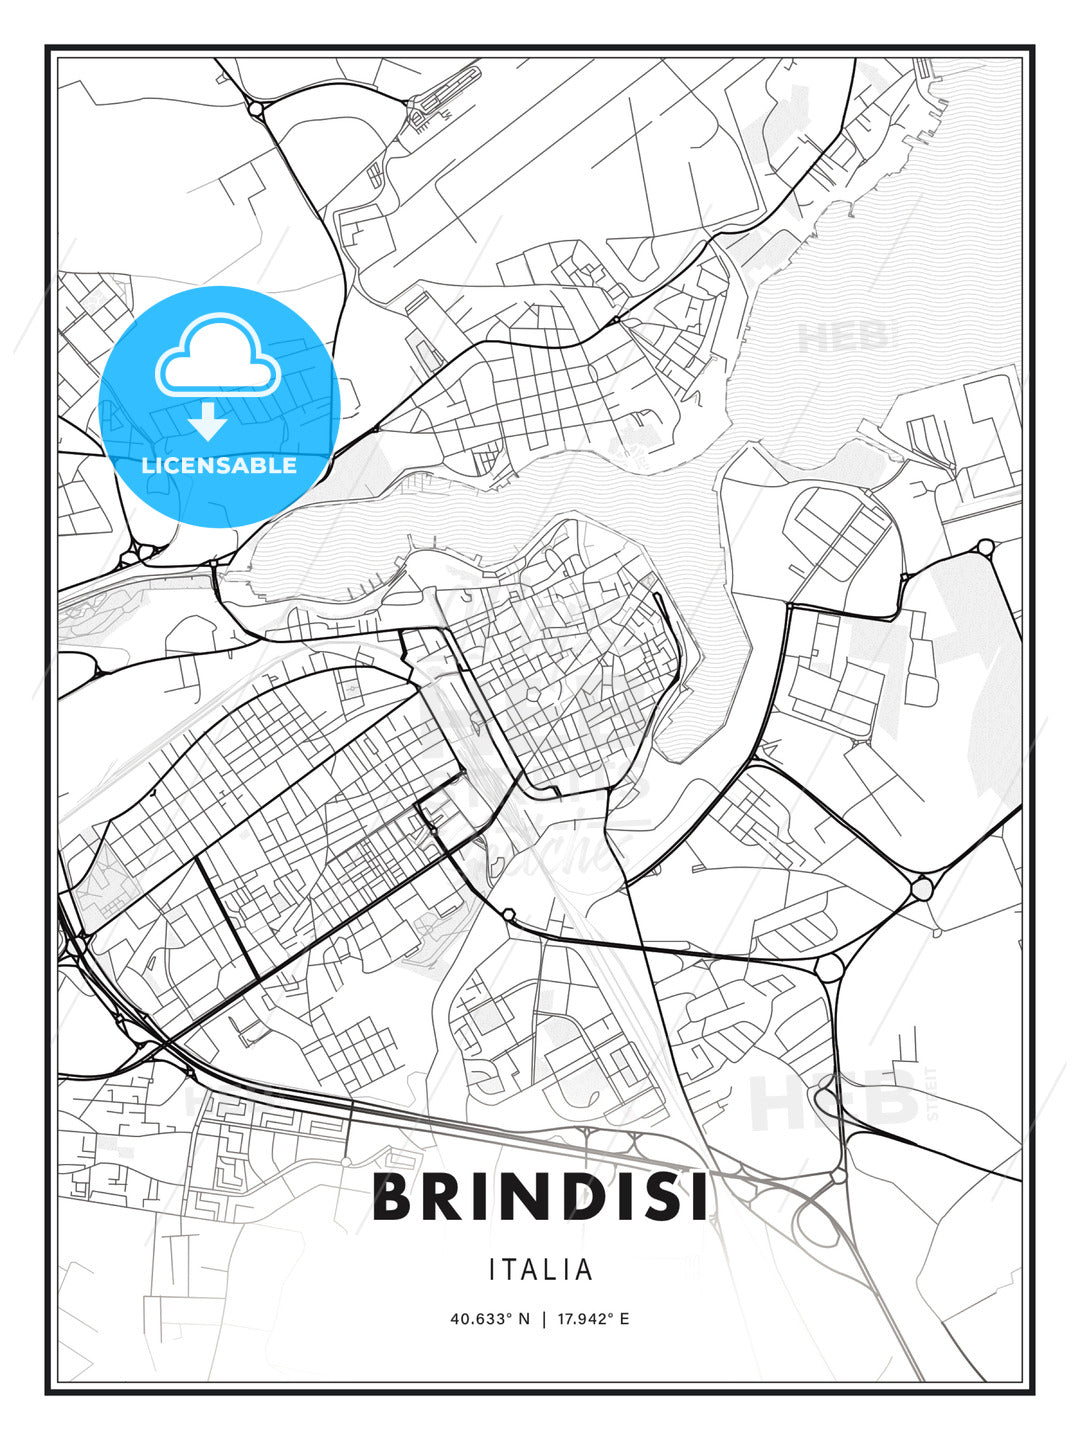 Brindisi, Italy, Modern Print Template in Various Formats - HEBSTREITS Sketches